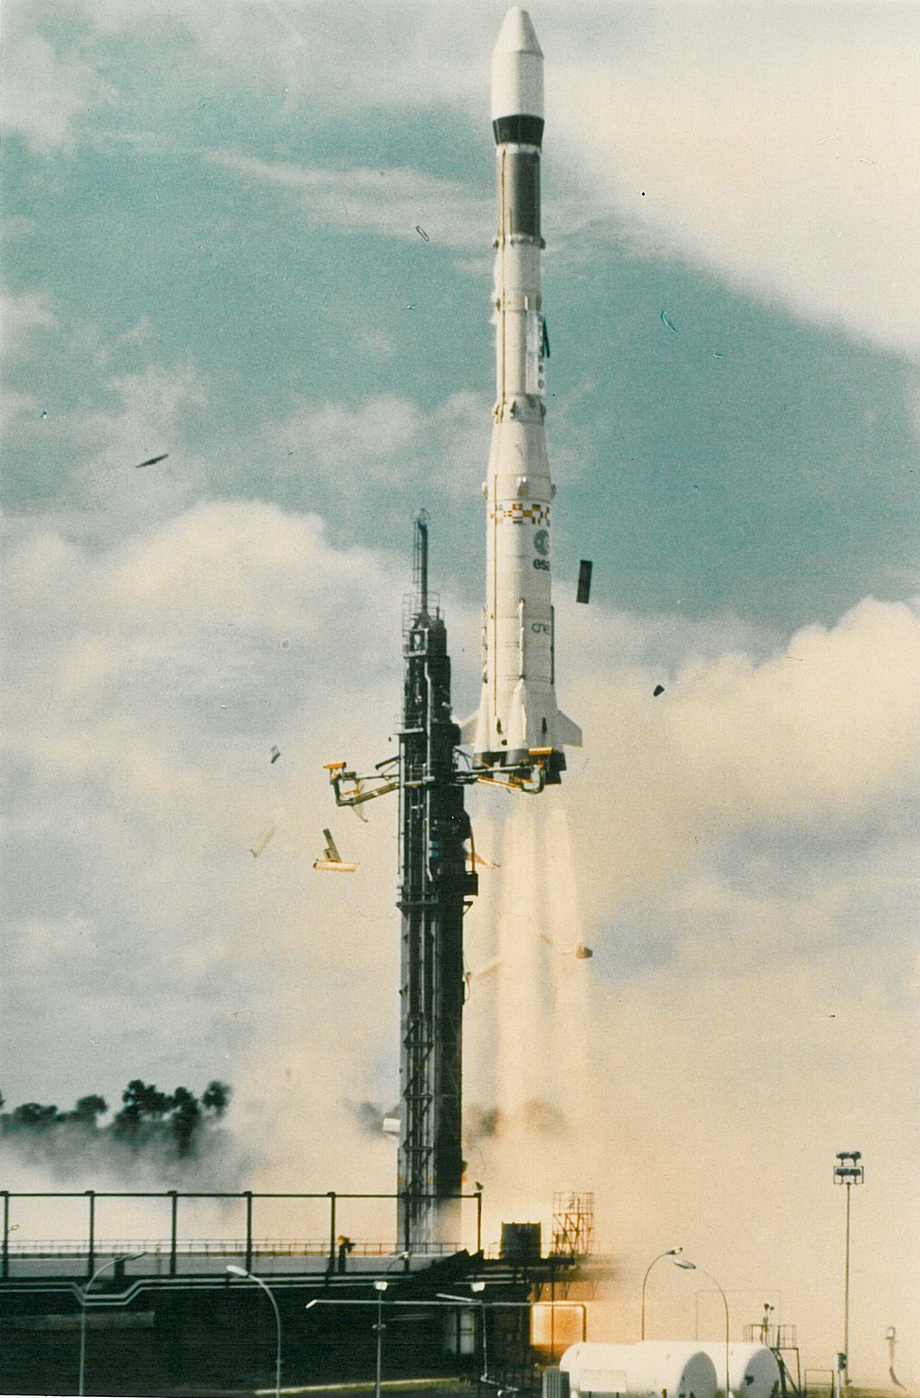 the first launch of the Ariane 1 rocket